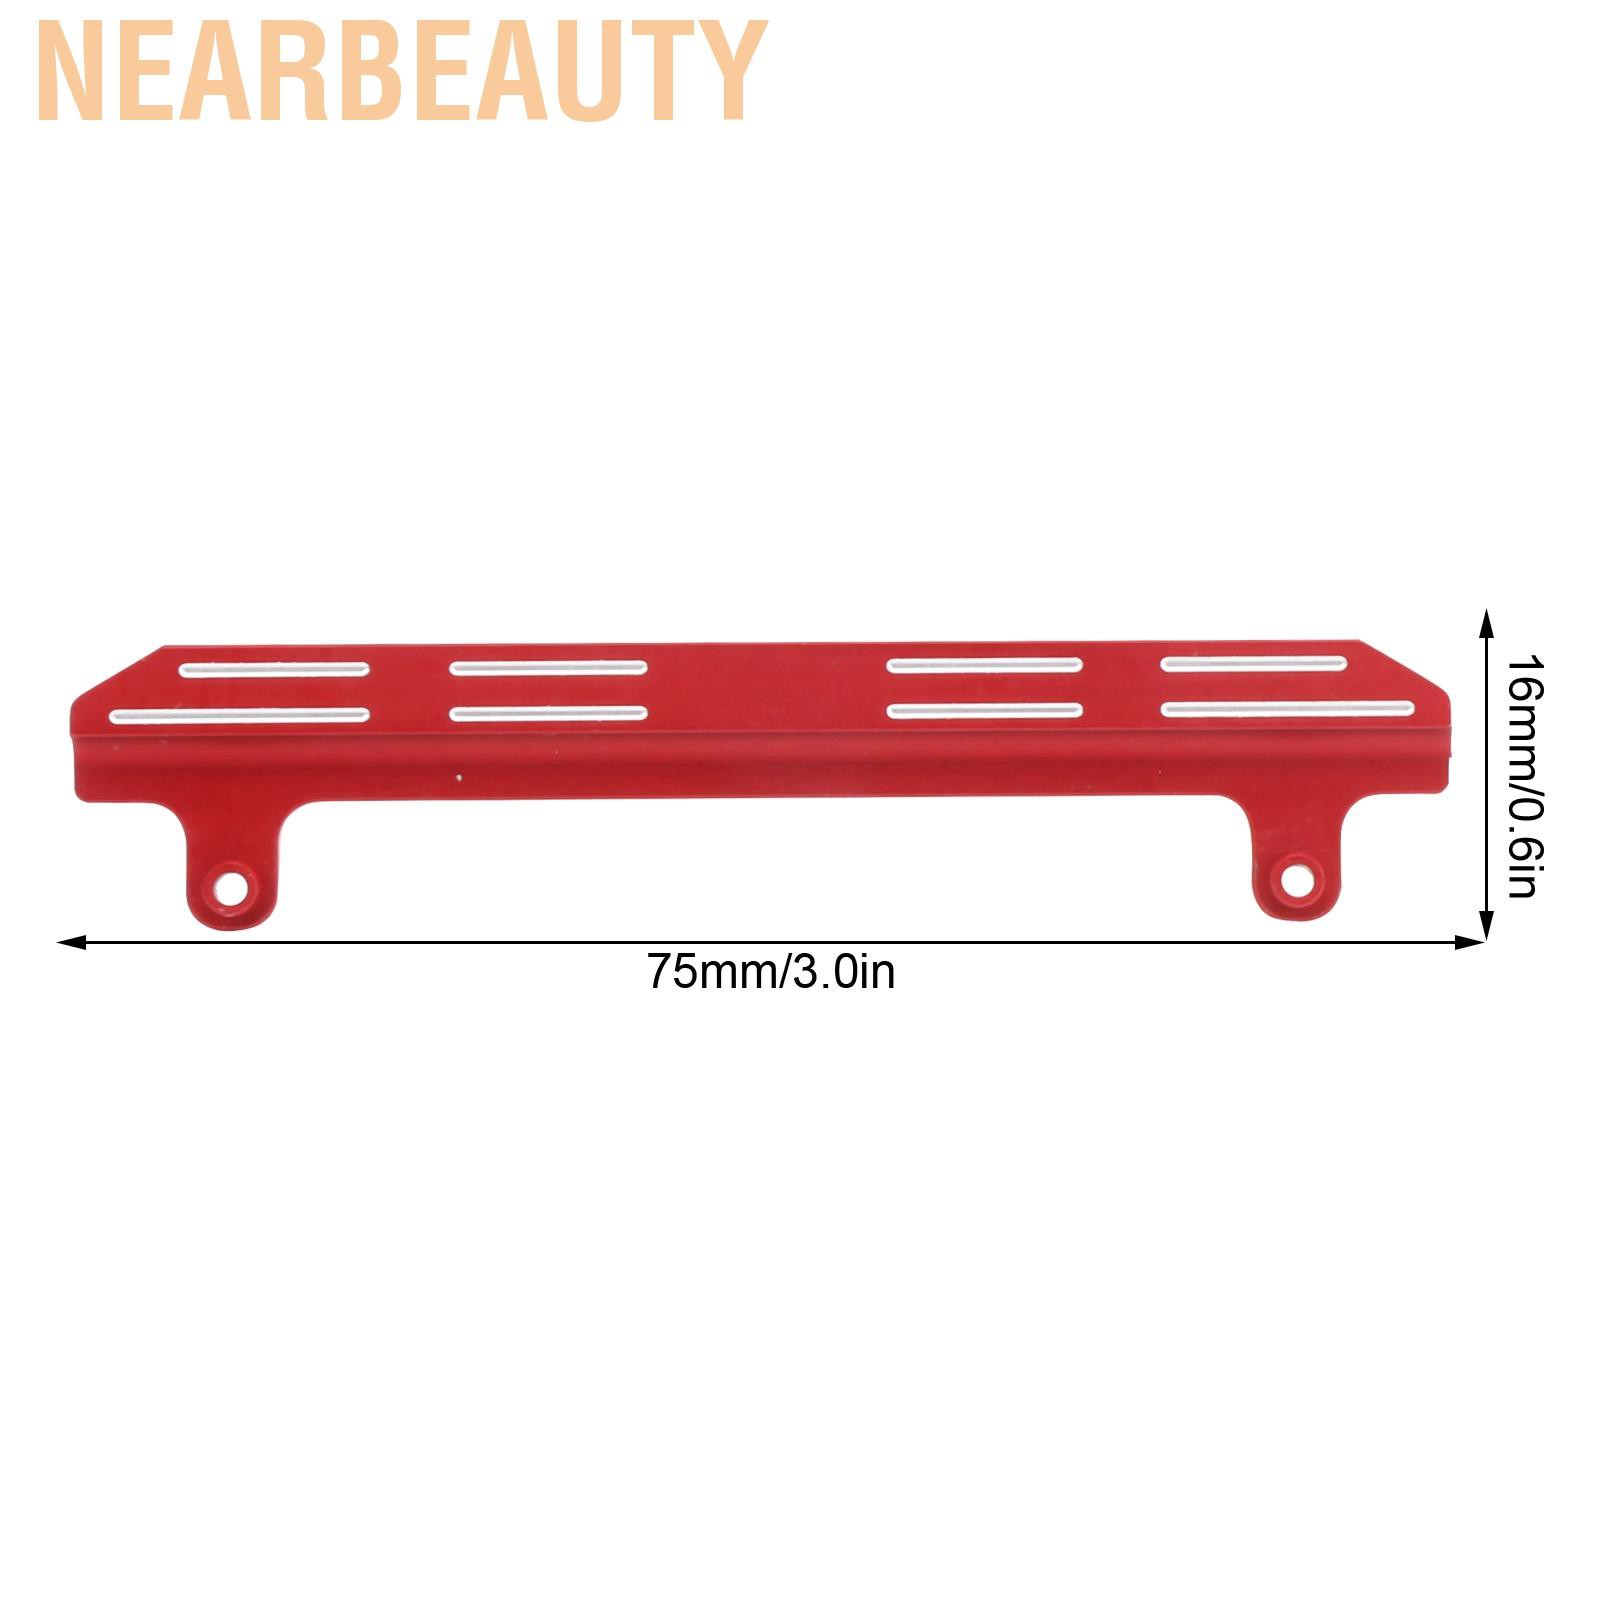 Nearbeauty RC Side Pedal Aluminum Alloy Plate Replacement for XIAOMI JIMNY 1/16 Car